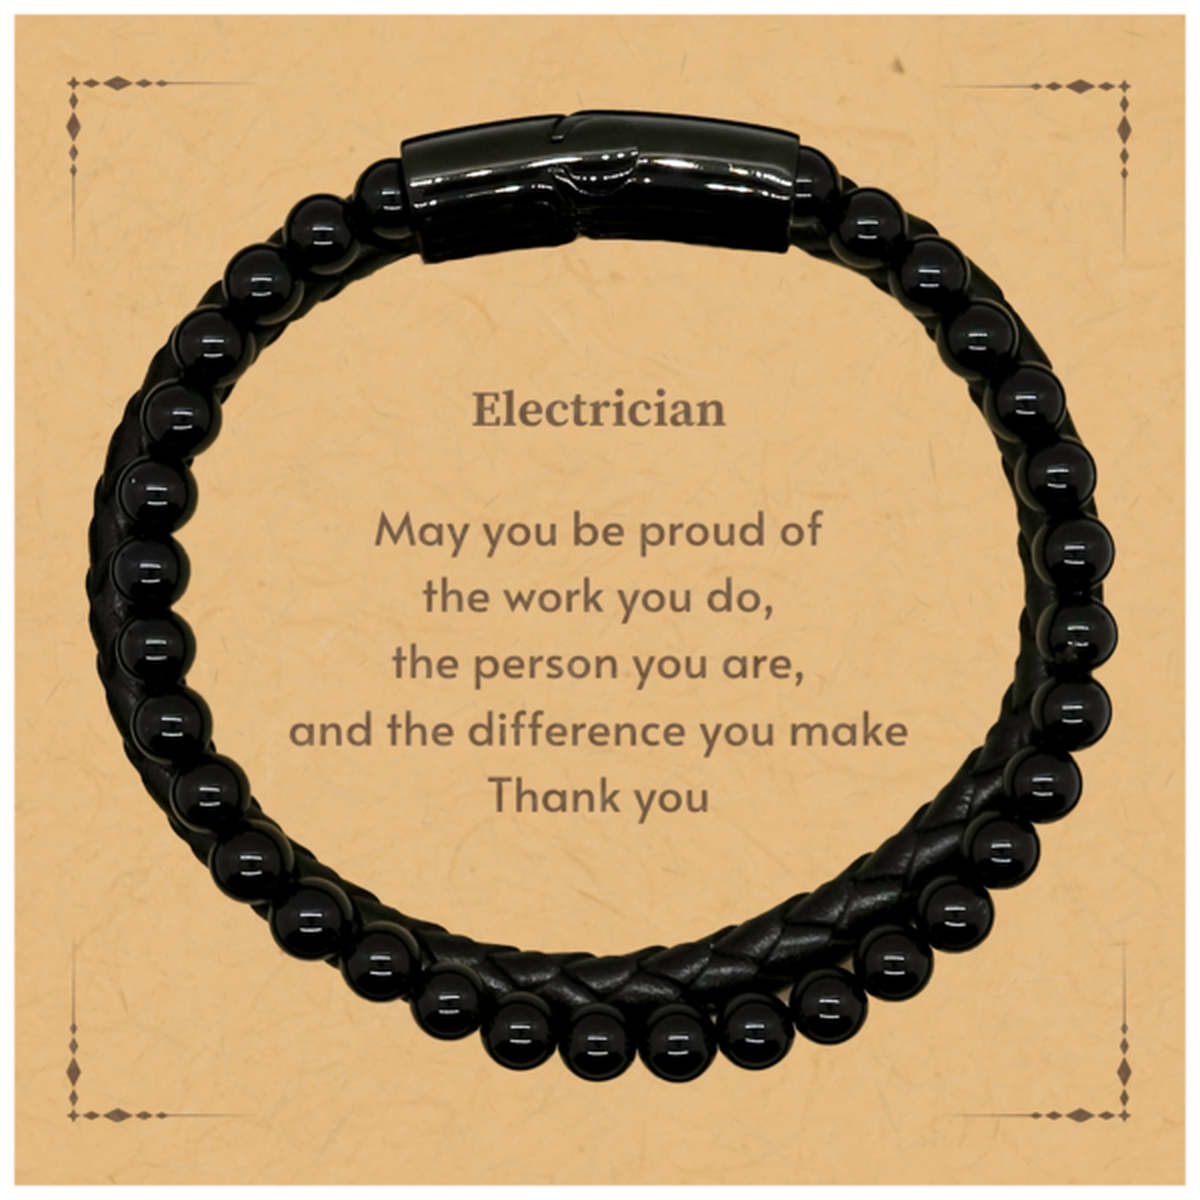 Heartwarming Stone Leather Bracelets Retirement Coworkers Gifts for Electrician, Electrician May You be proud of the work you do, the person you are Gifts for Boss Men Women Friends